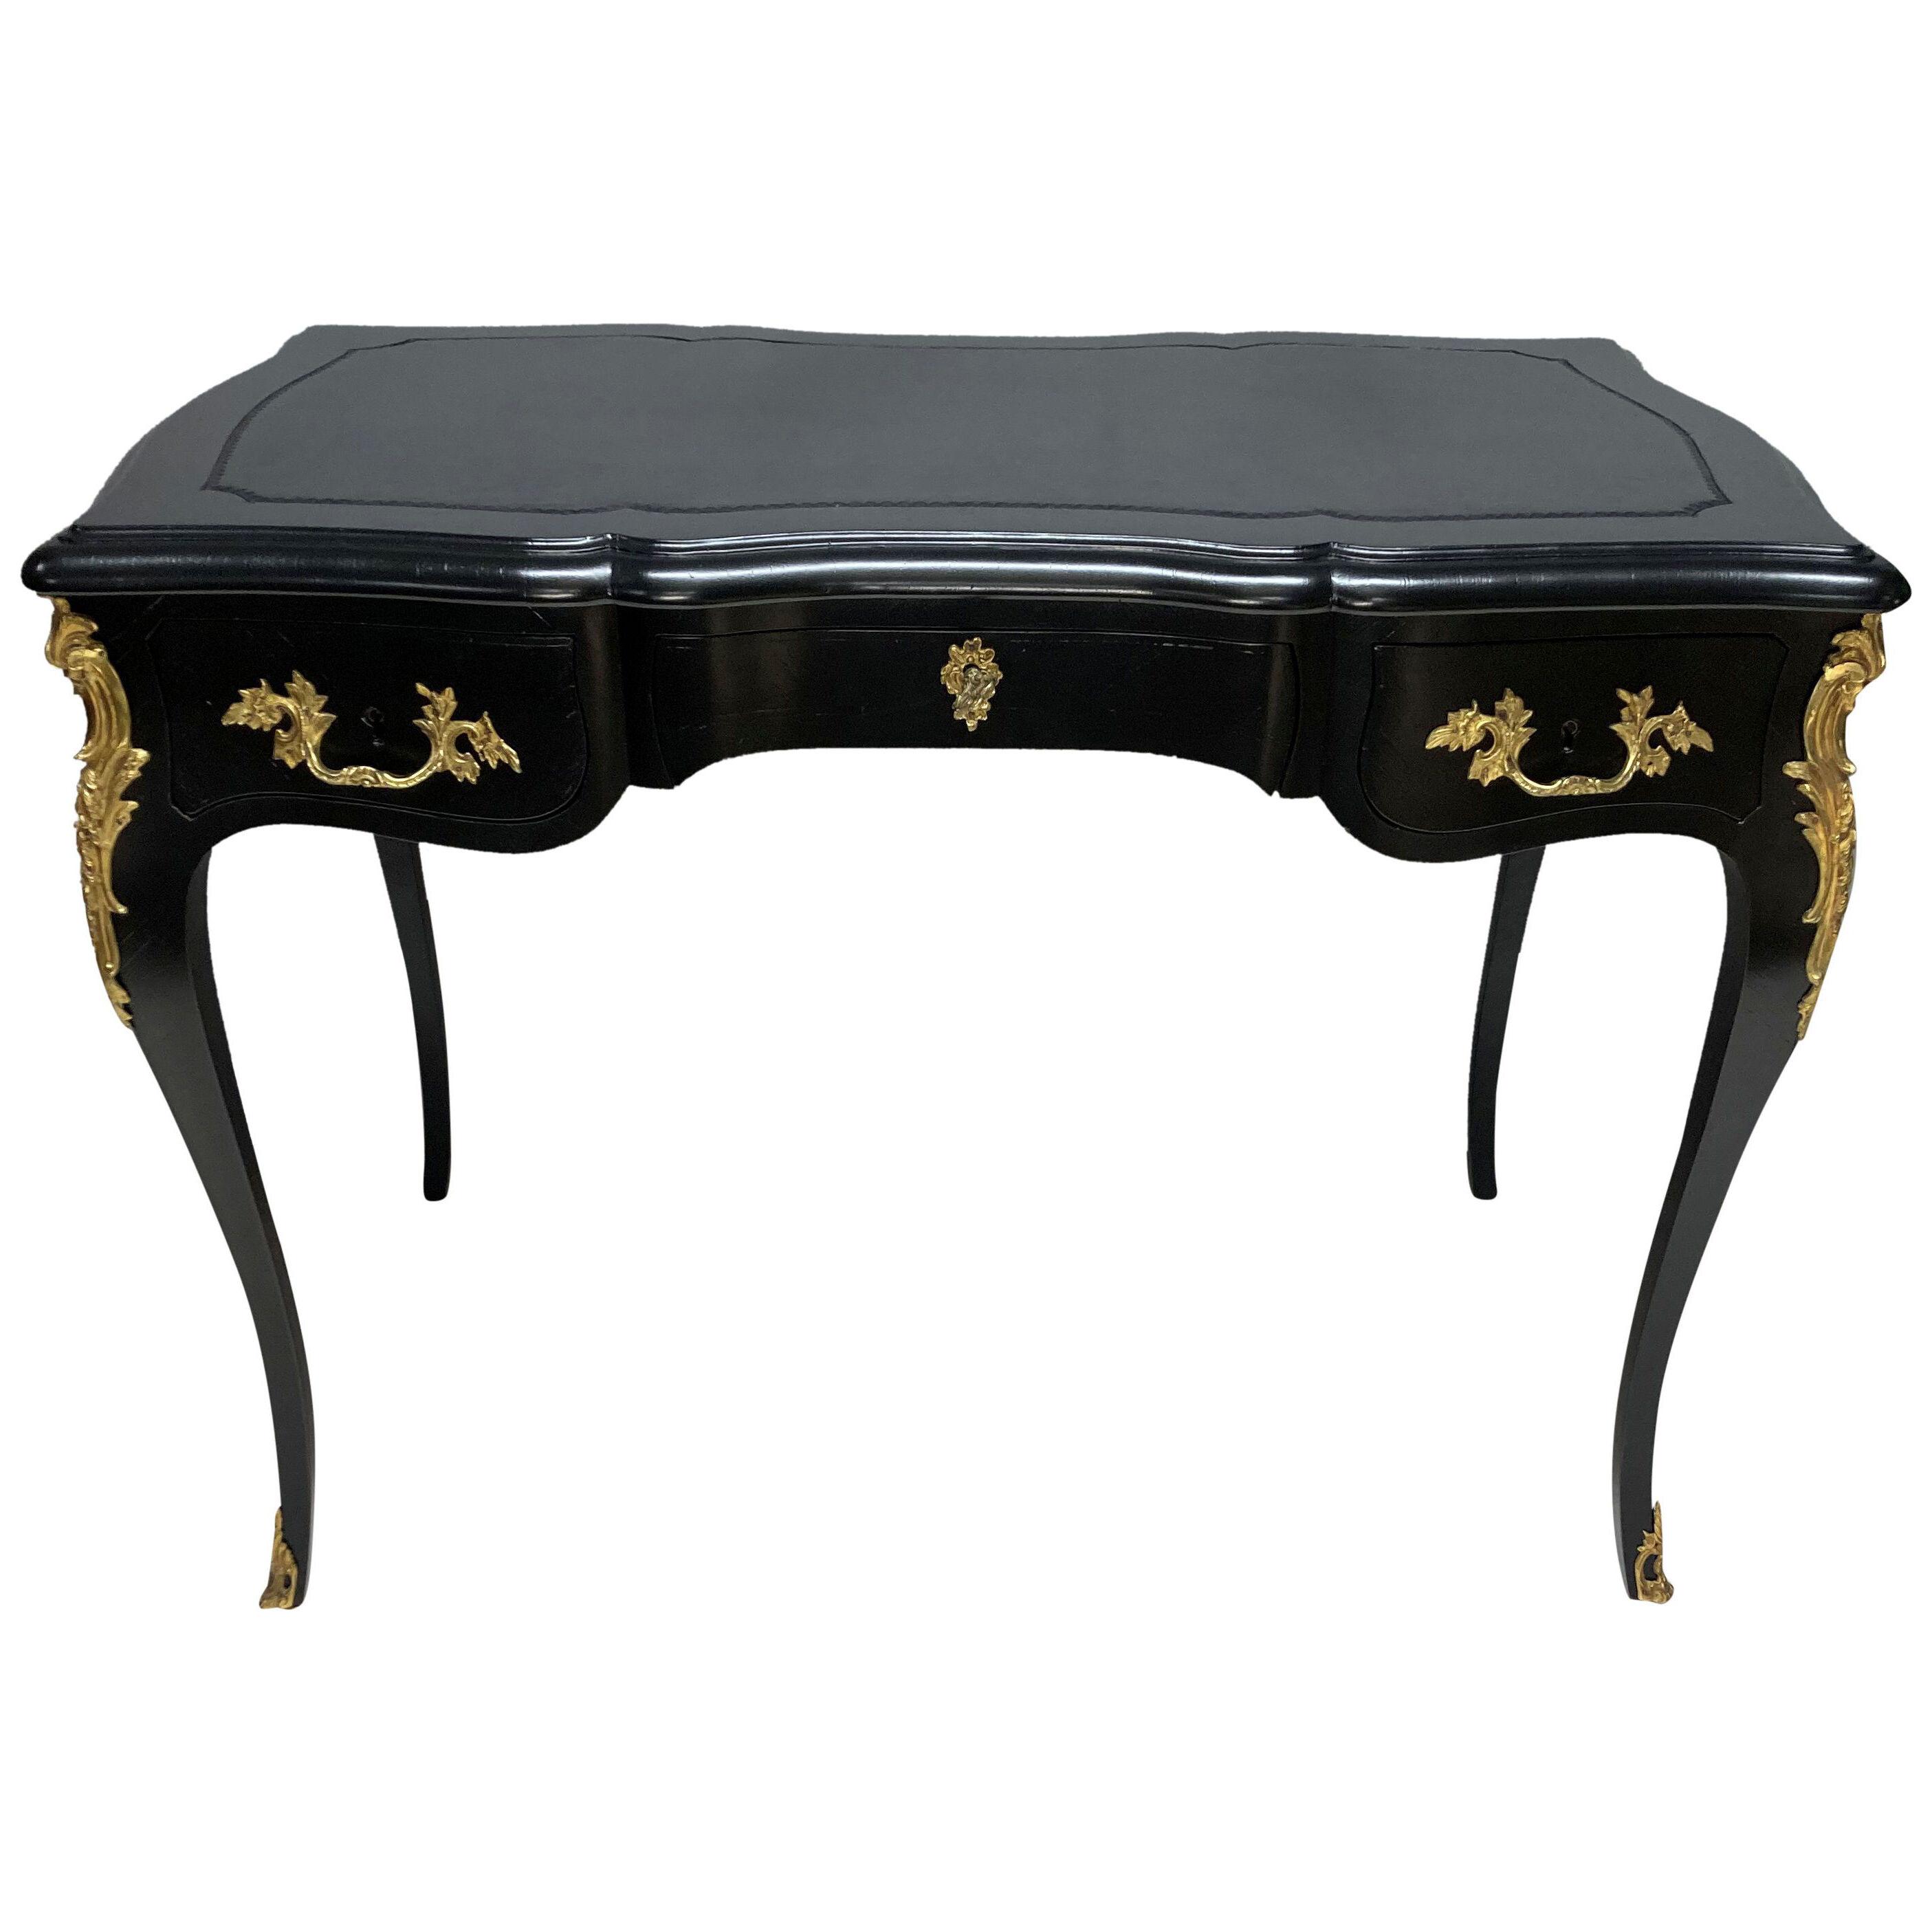 A BLACK LACQUERED LOUIS XV STYLE WRITING TABLE